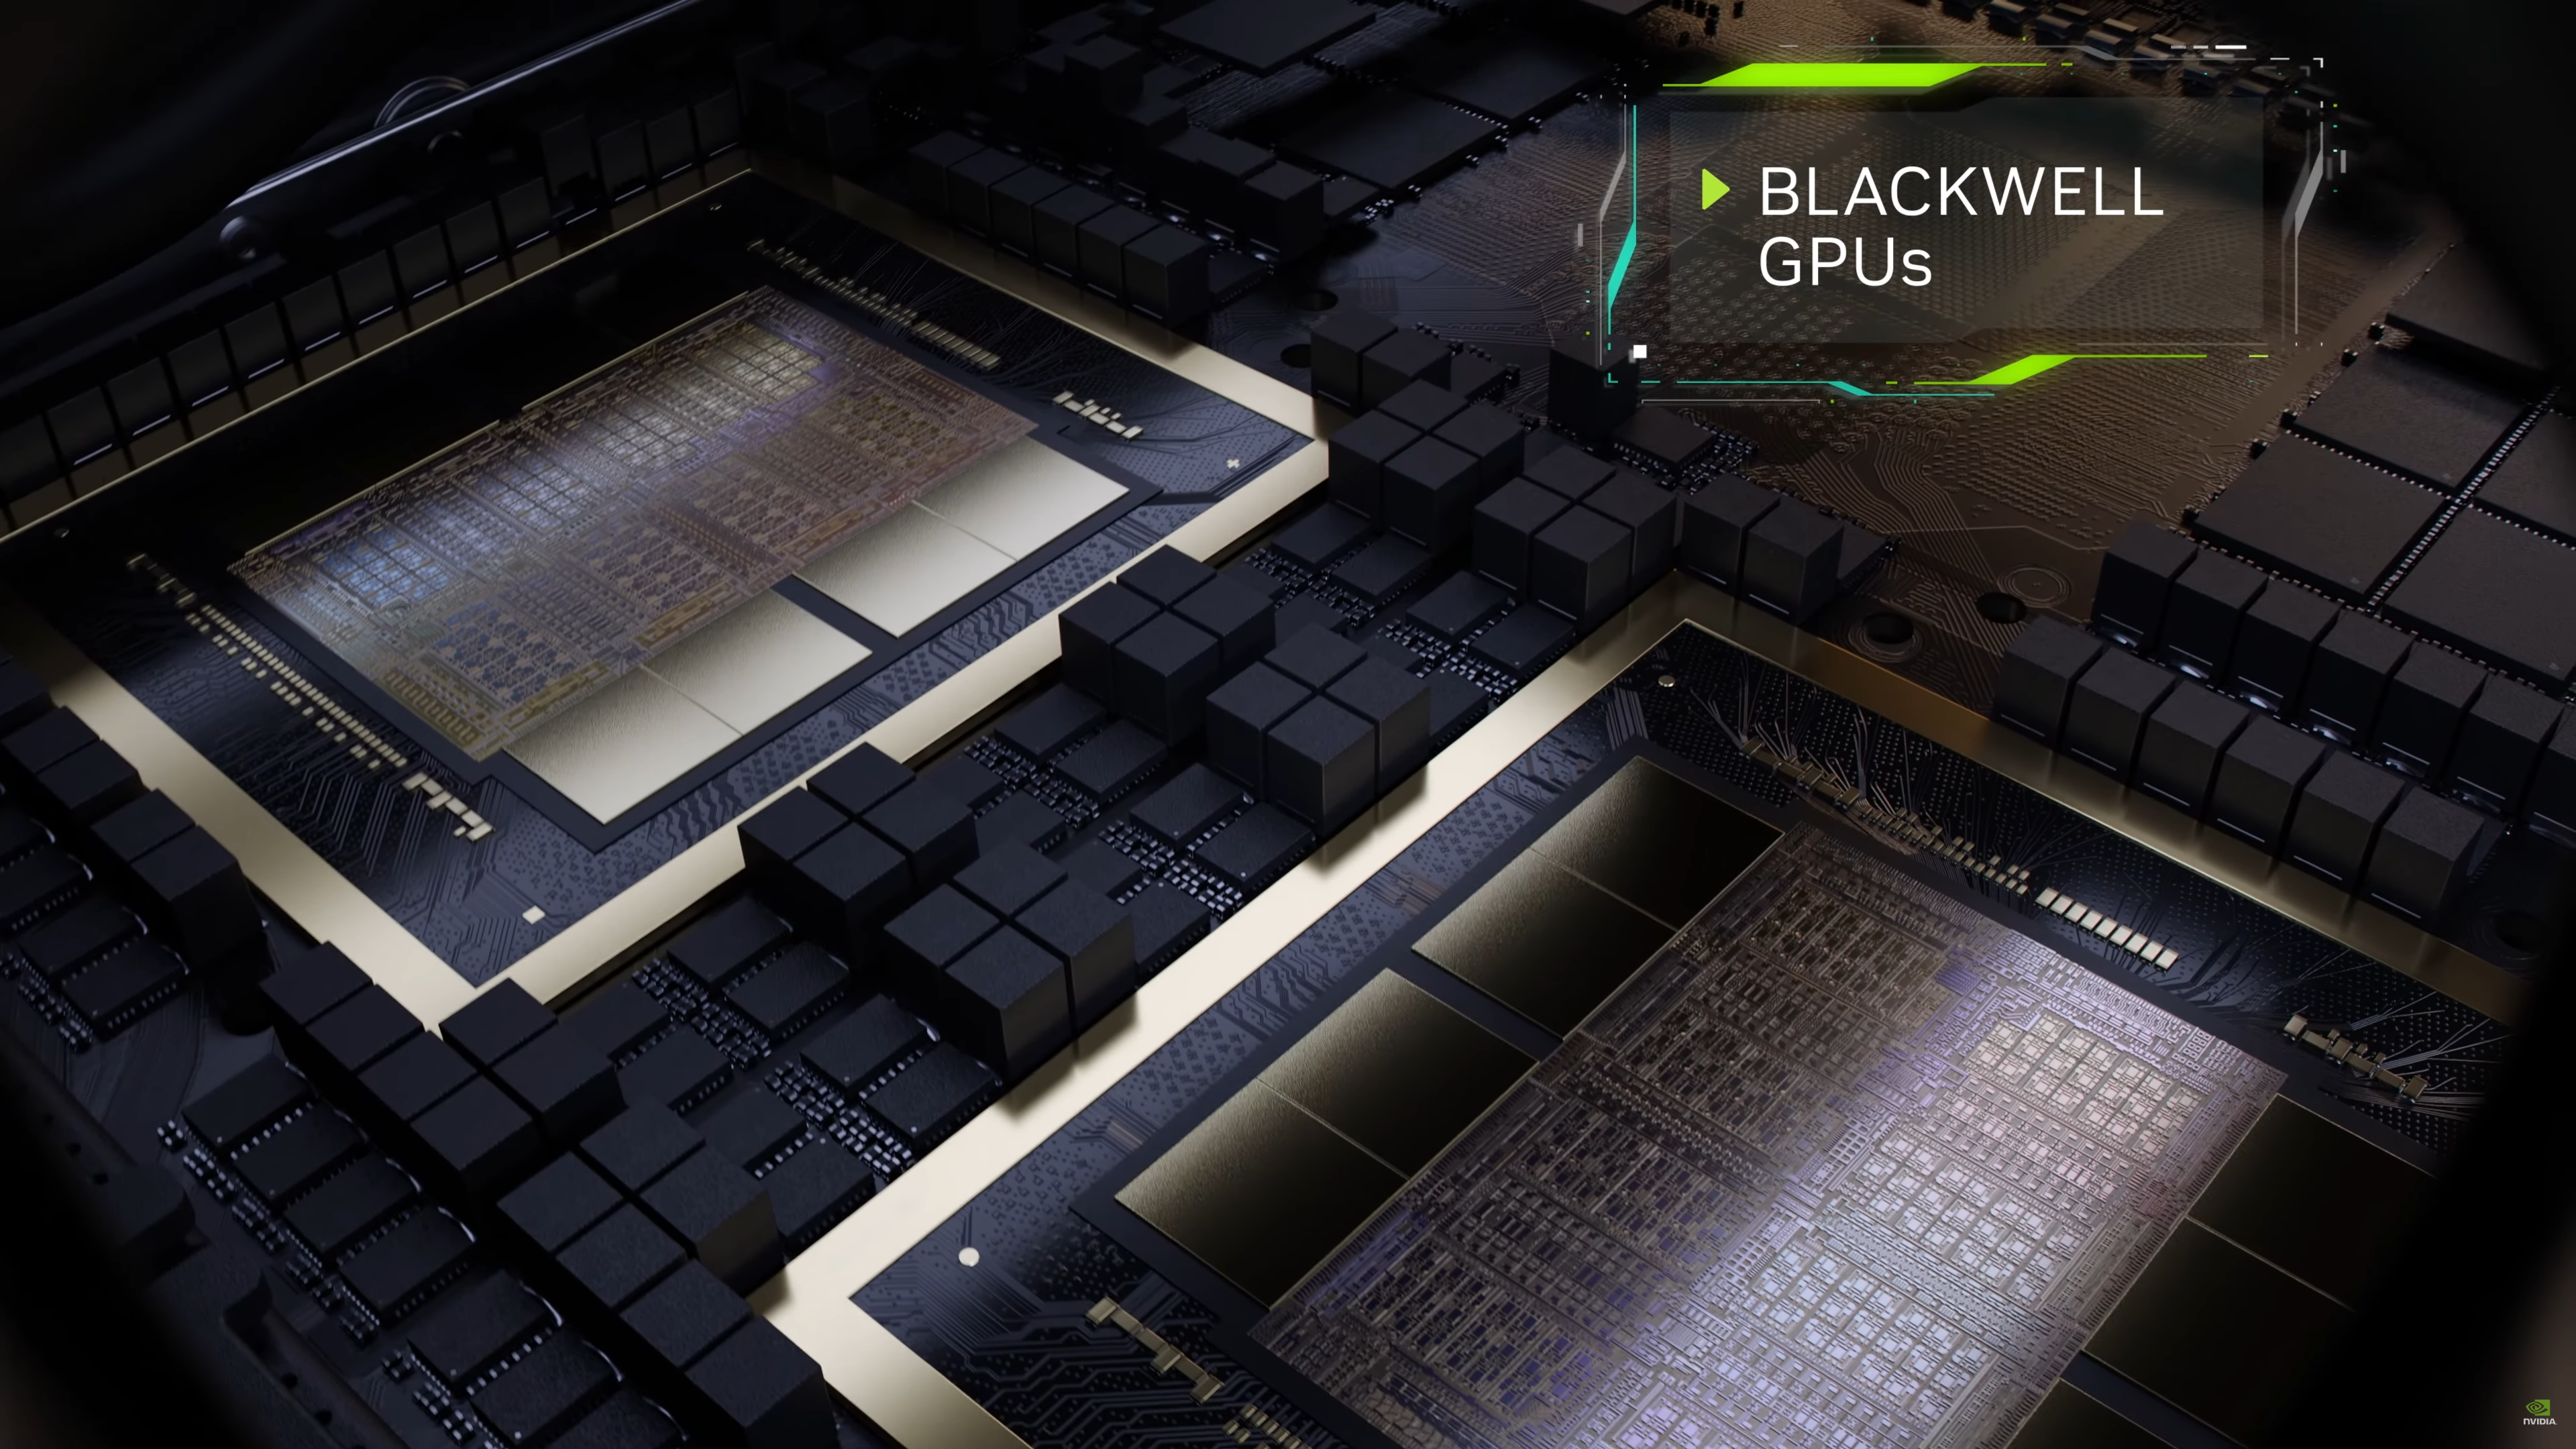 NVIDIA Shares Blackwell GPU Compute Stats: 30% More FP64 Than Hopper, 30x Faster In Simulation & Science, 18X Faster Than CPUs 1